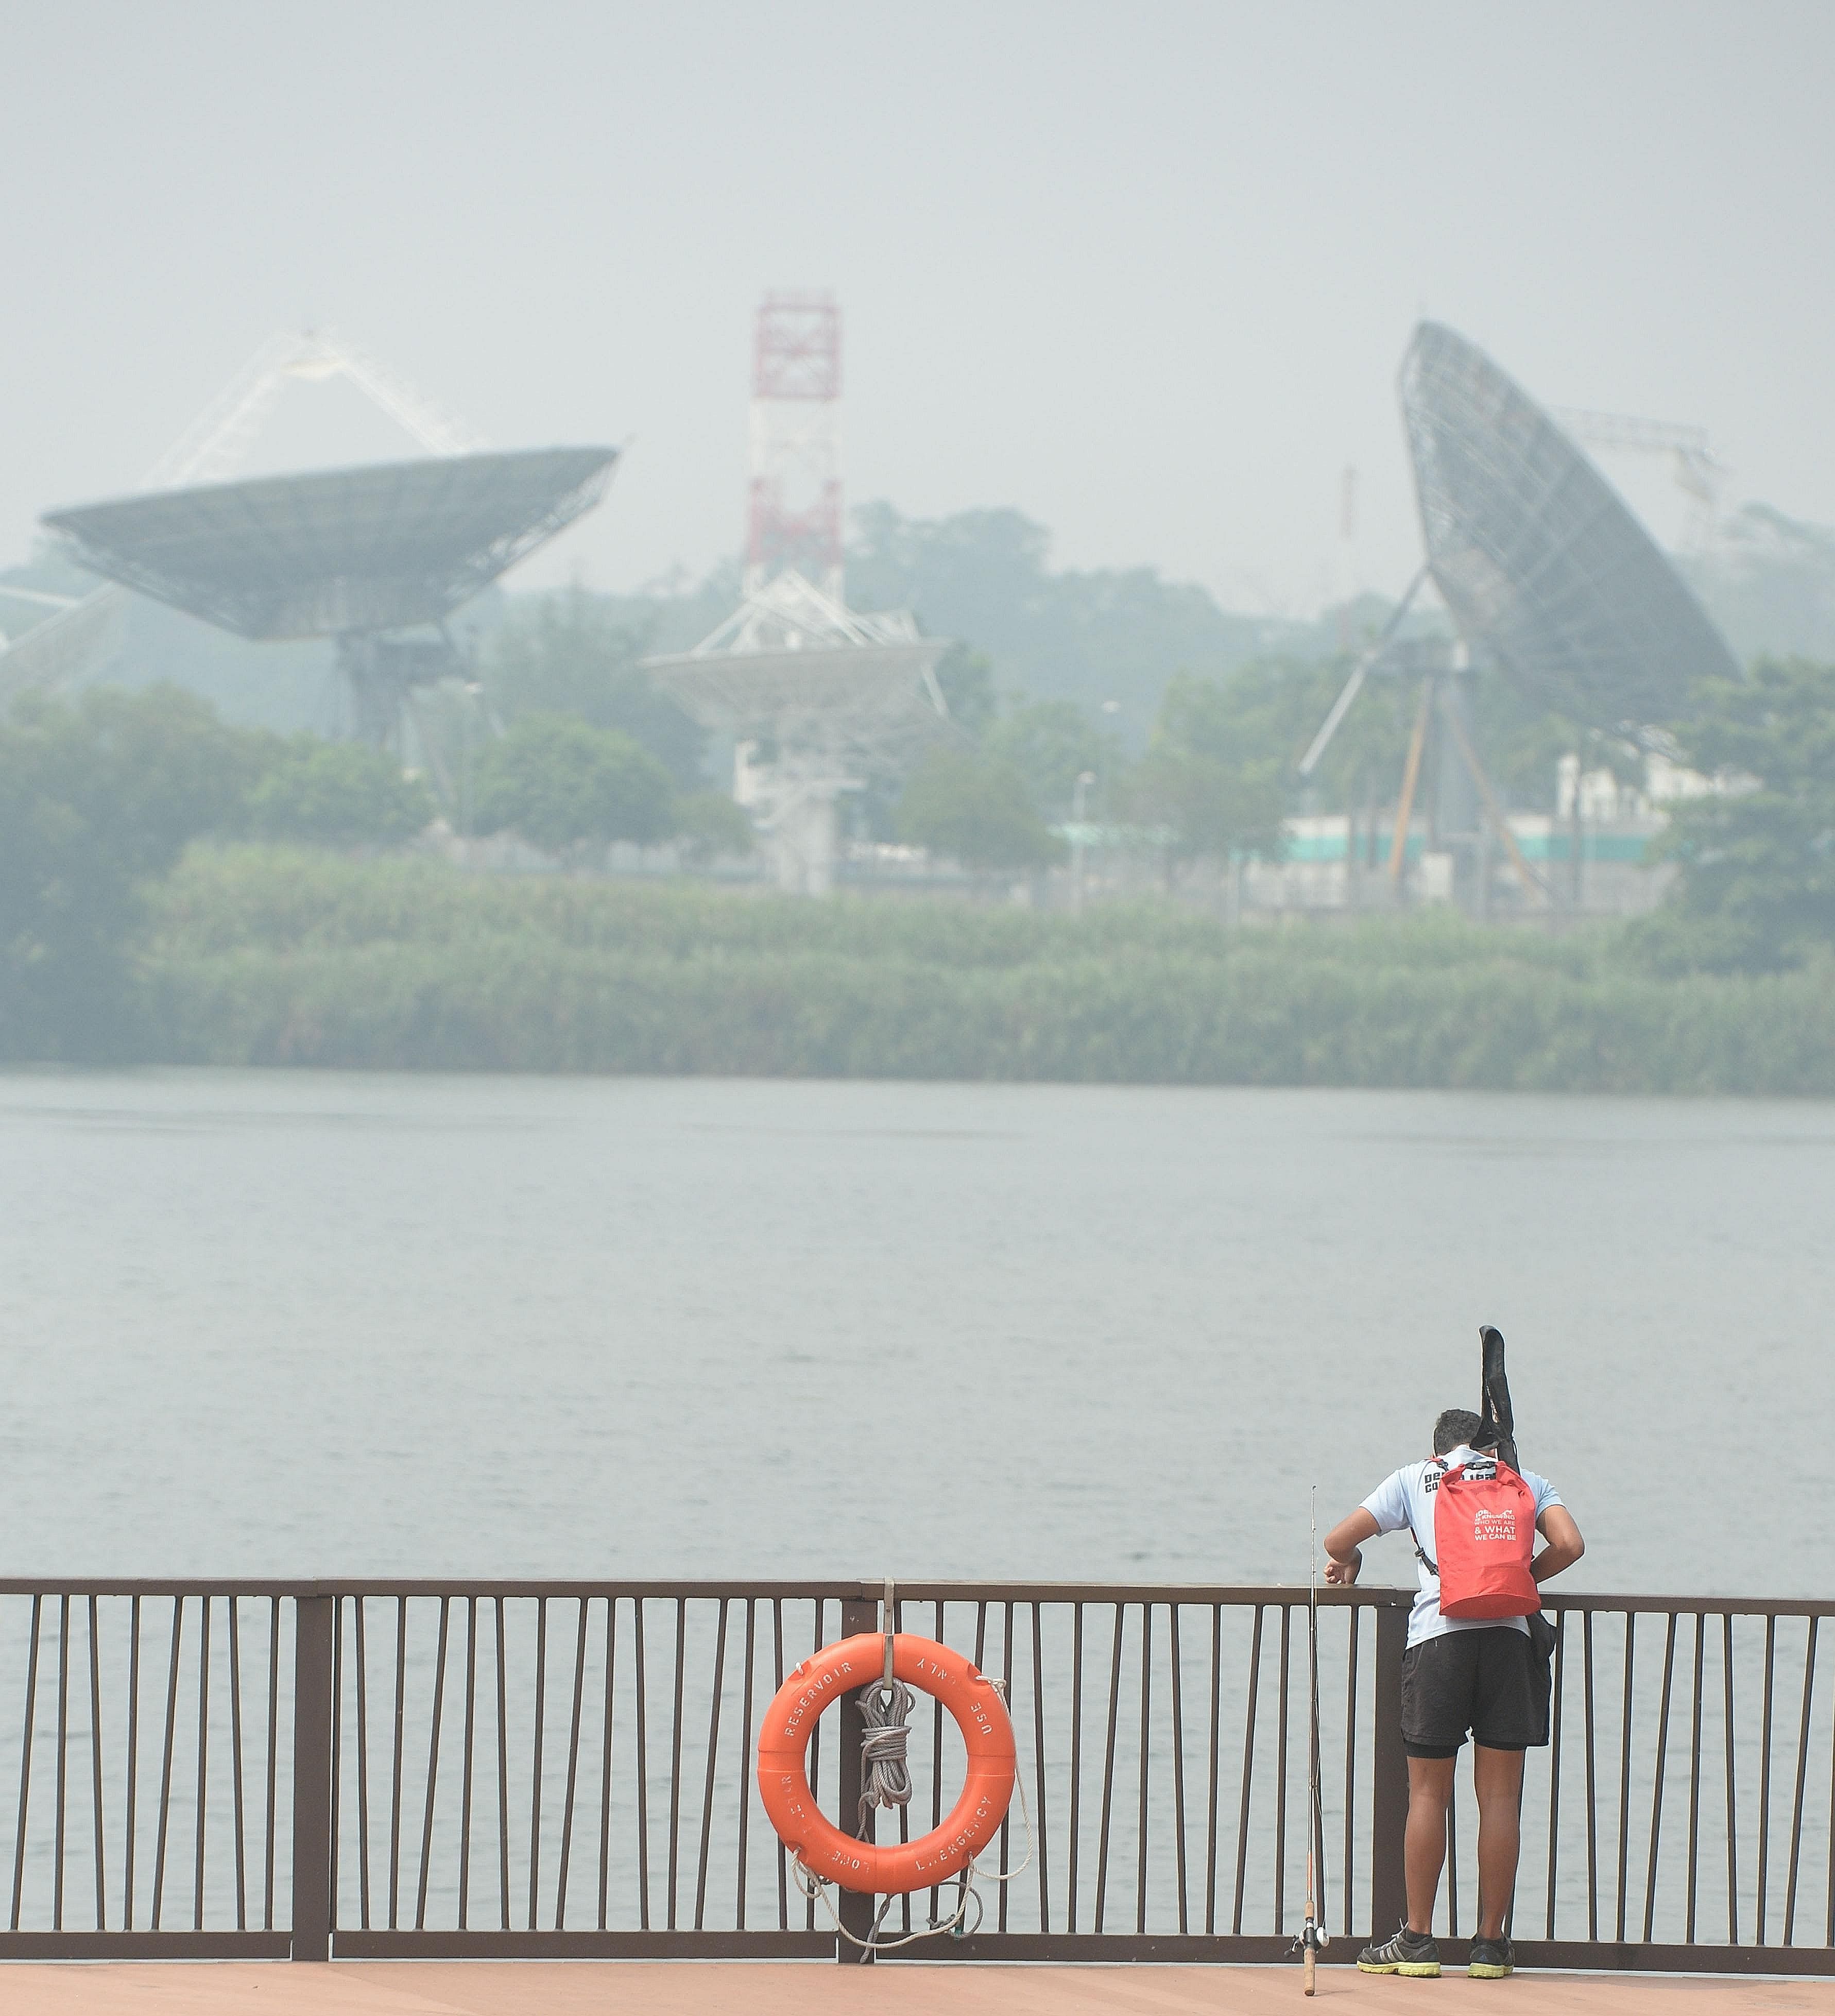 The haze at Lower Seletar Reservoir last Saturday. As protest efforts continue, it is important for now to give more thought to what Singapore could effectively do to mitigate the ill effects of transboundary haze on the economy, our health and our e